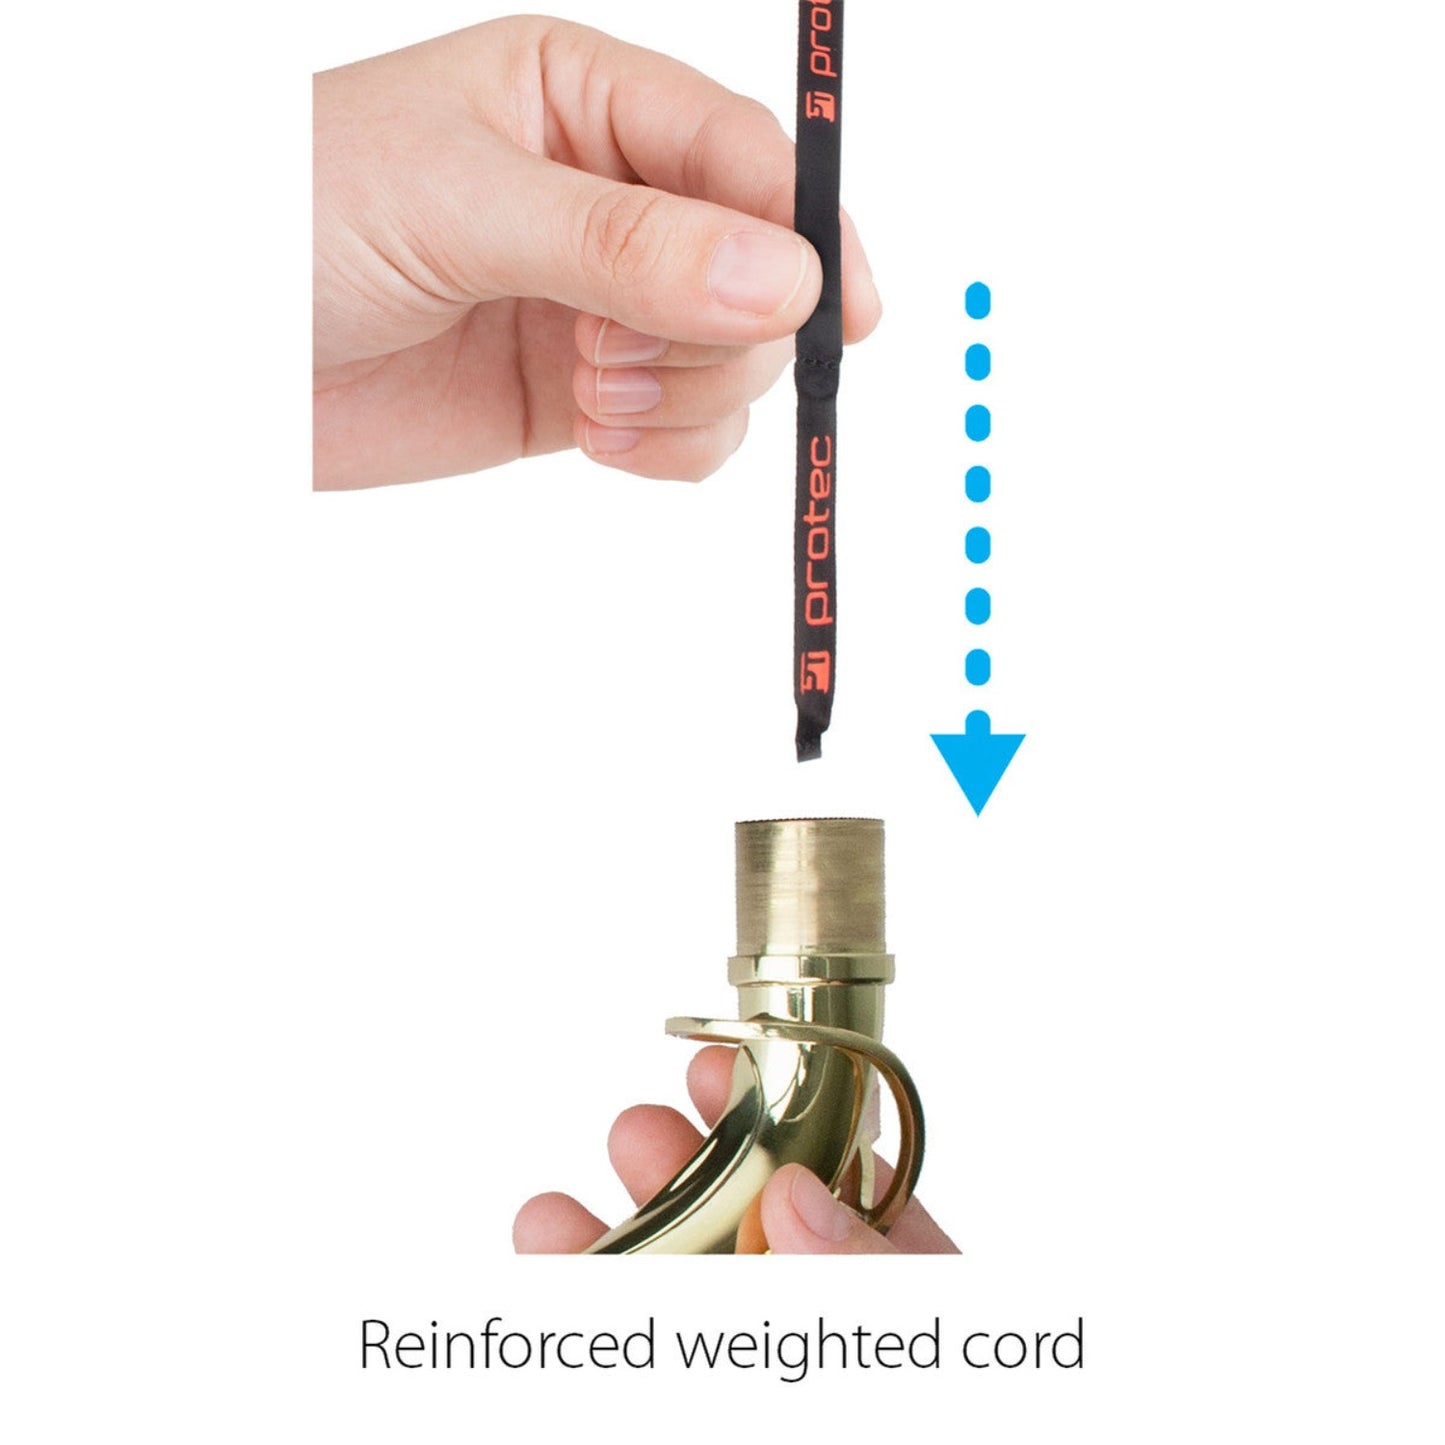 Image showing weighted end of swab going into saxophone next; text at bottom reads "Reinforced weighted cord". 